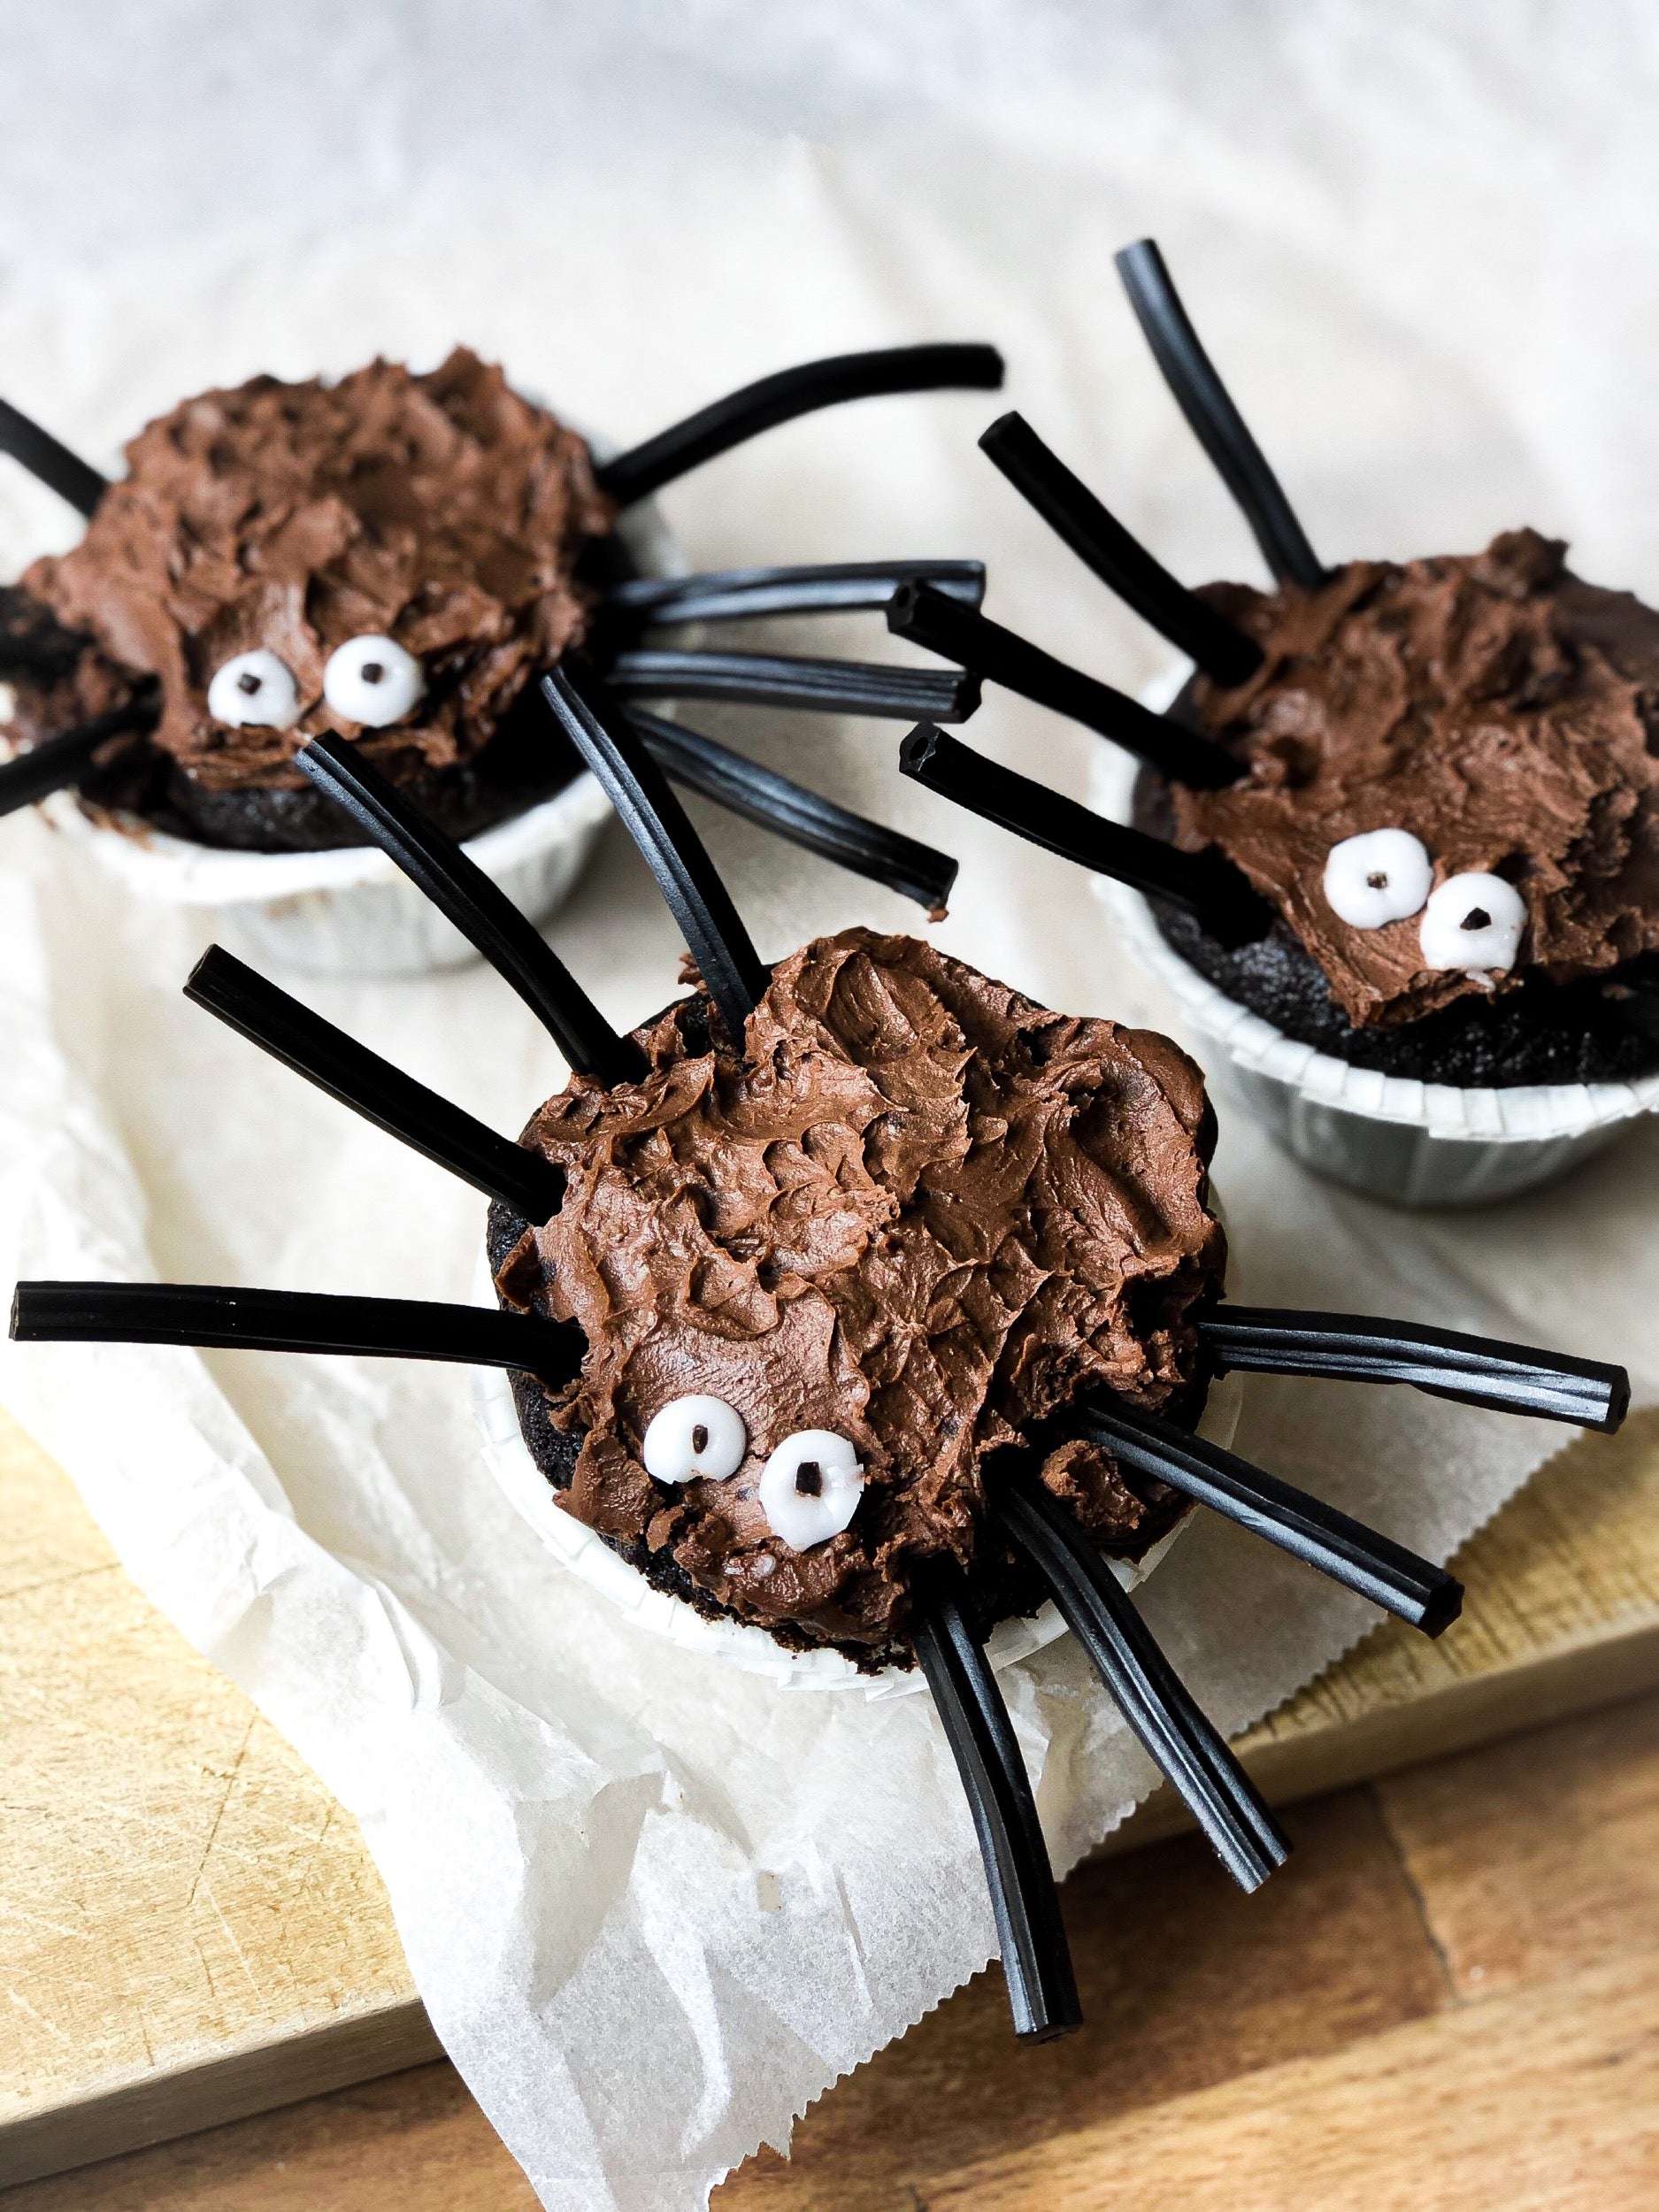 Spider cupcakes with salted caramel filling and 03 Stout Spent Grain Flour